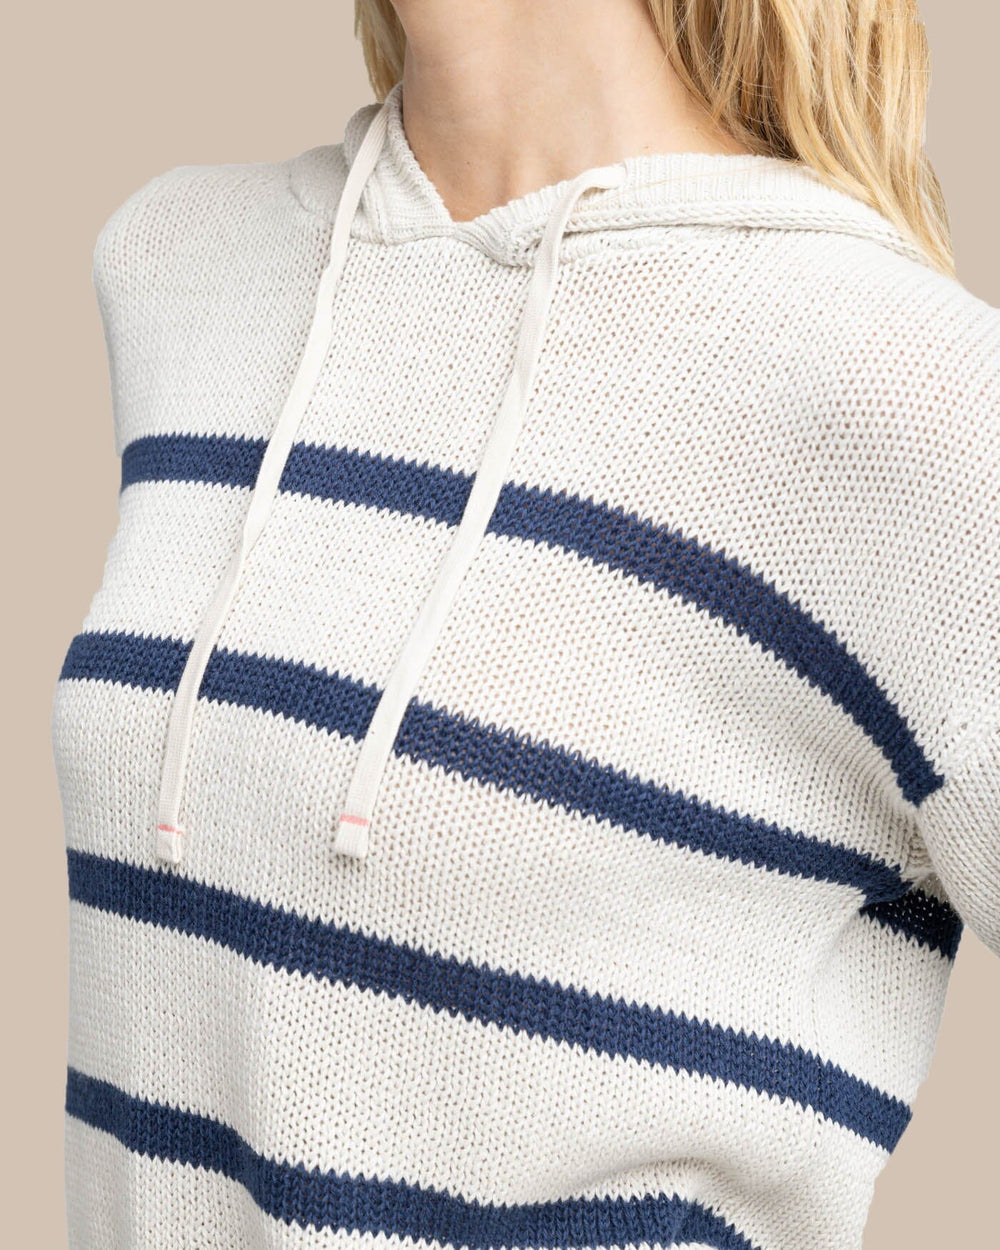 The detail view of the Southern Tide Everlee Striped Hoodie Sweater by Southern Tide - Stone